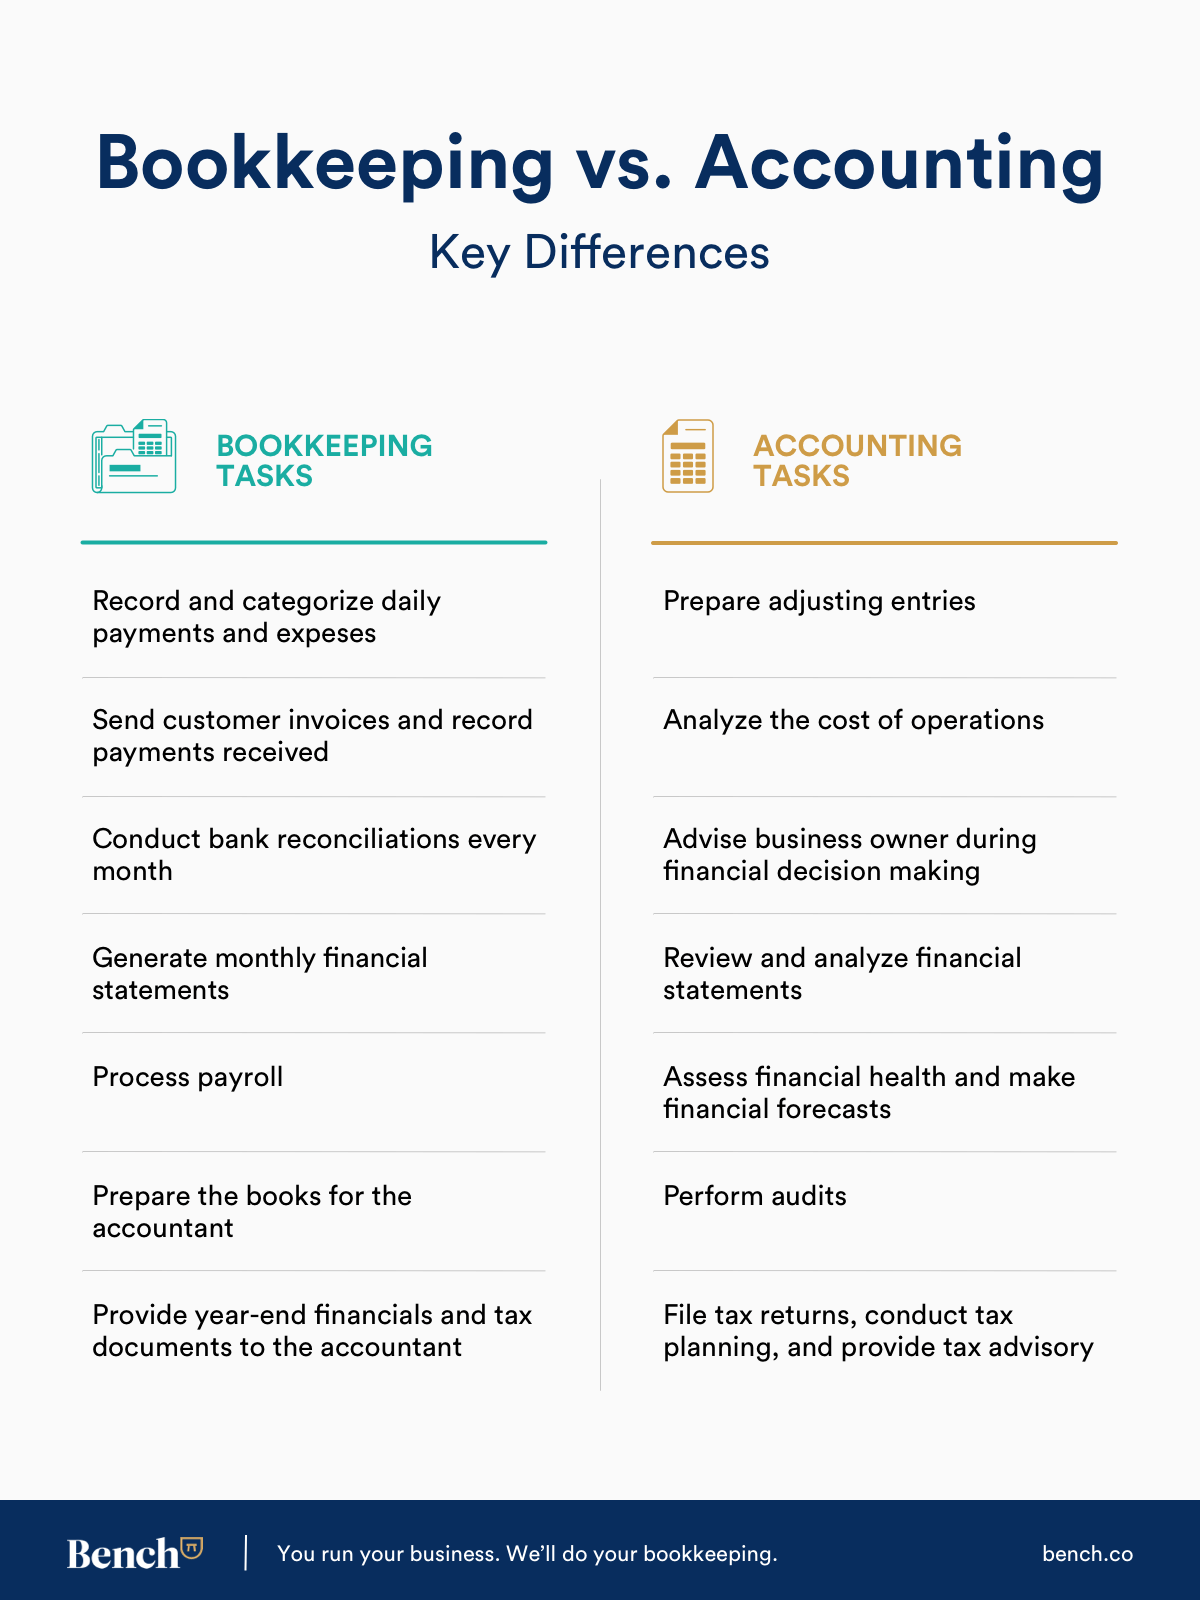 IMG / Blog / Bookkeeping versus accounting infographic